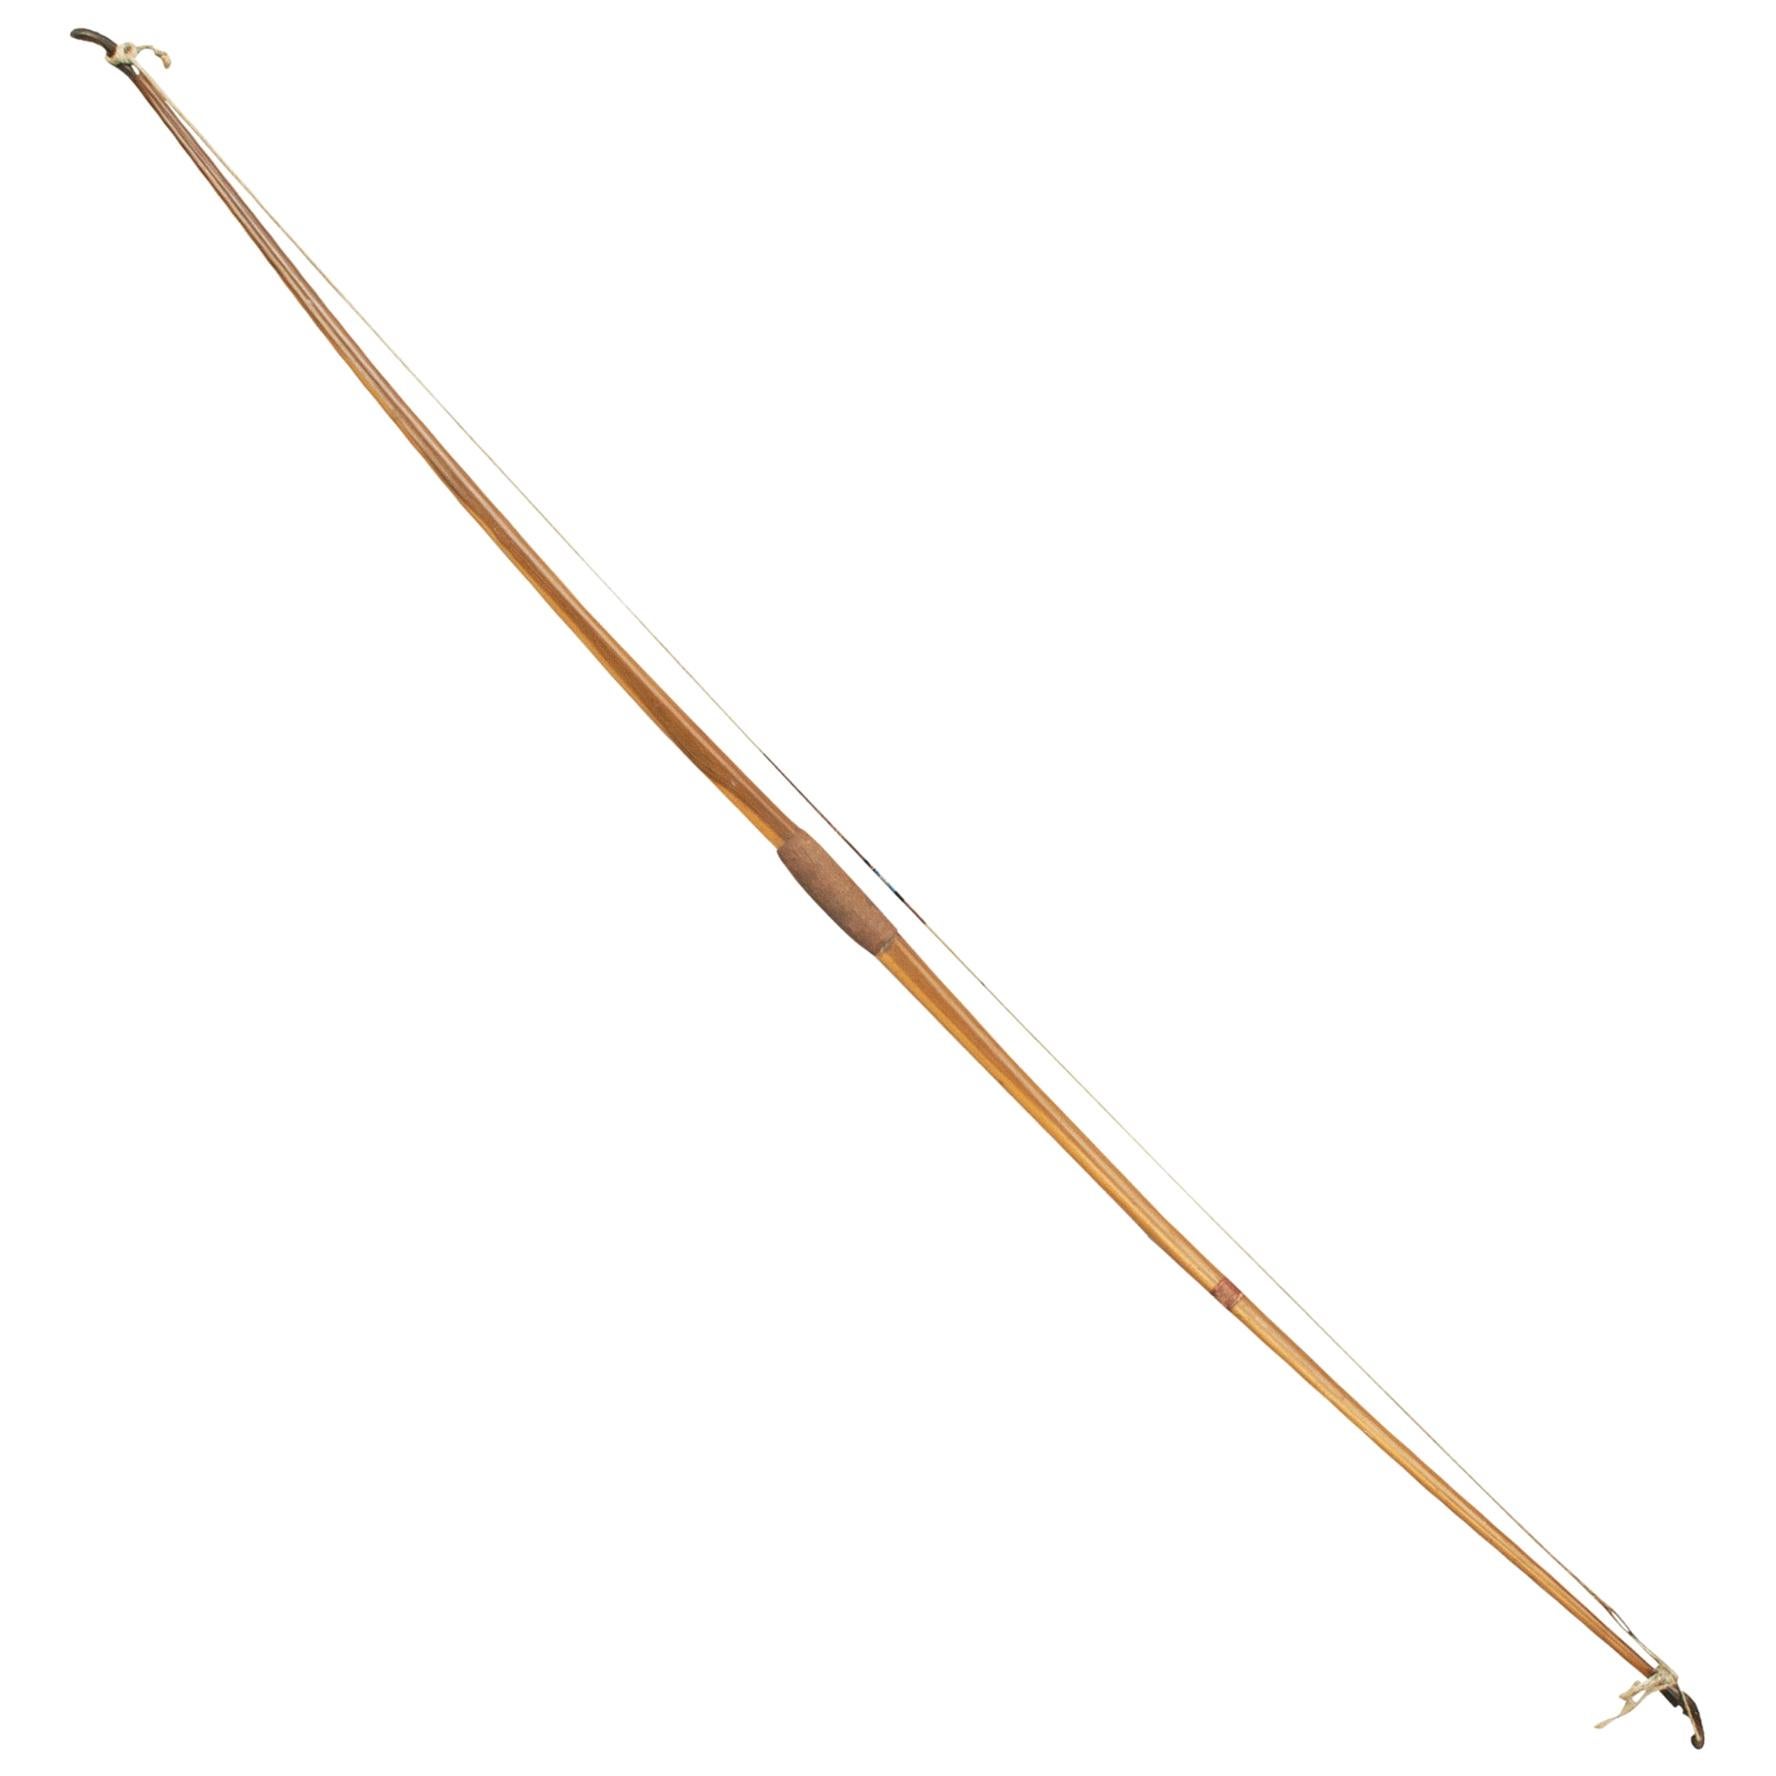 Antique Archery Longbow in Yew Wood by Thomas Aldred